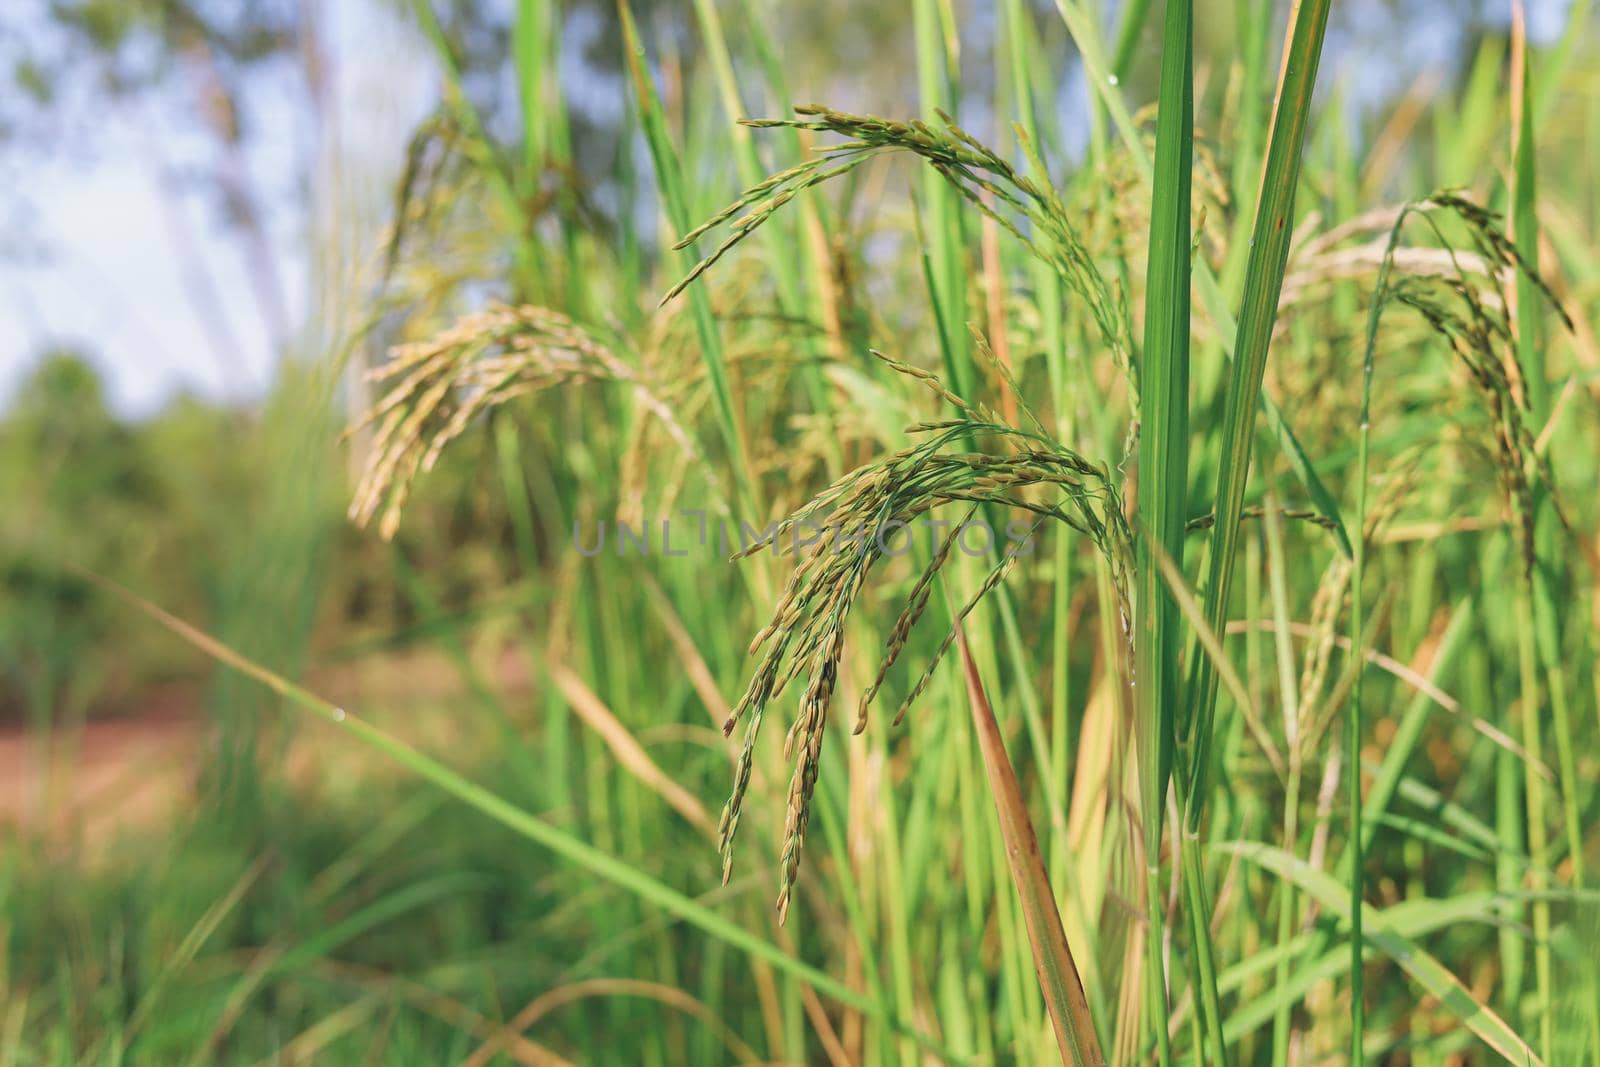 The rice ears that are beginning to turn yellow are looking forward to harvest day. by iPixel_Studio